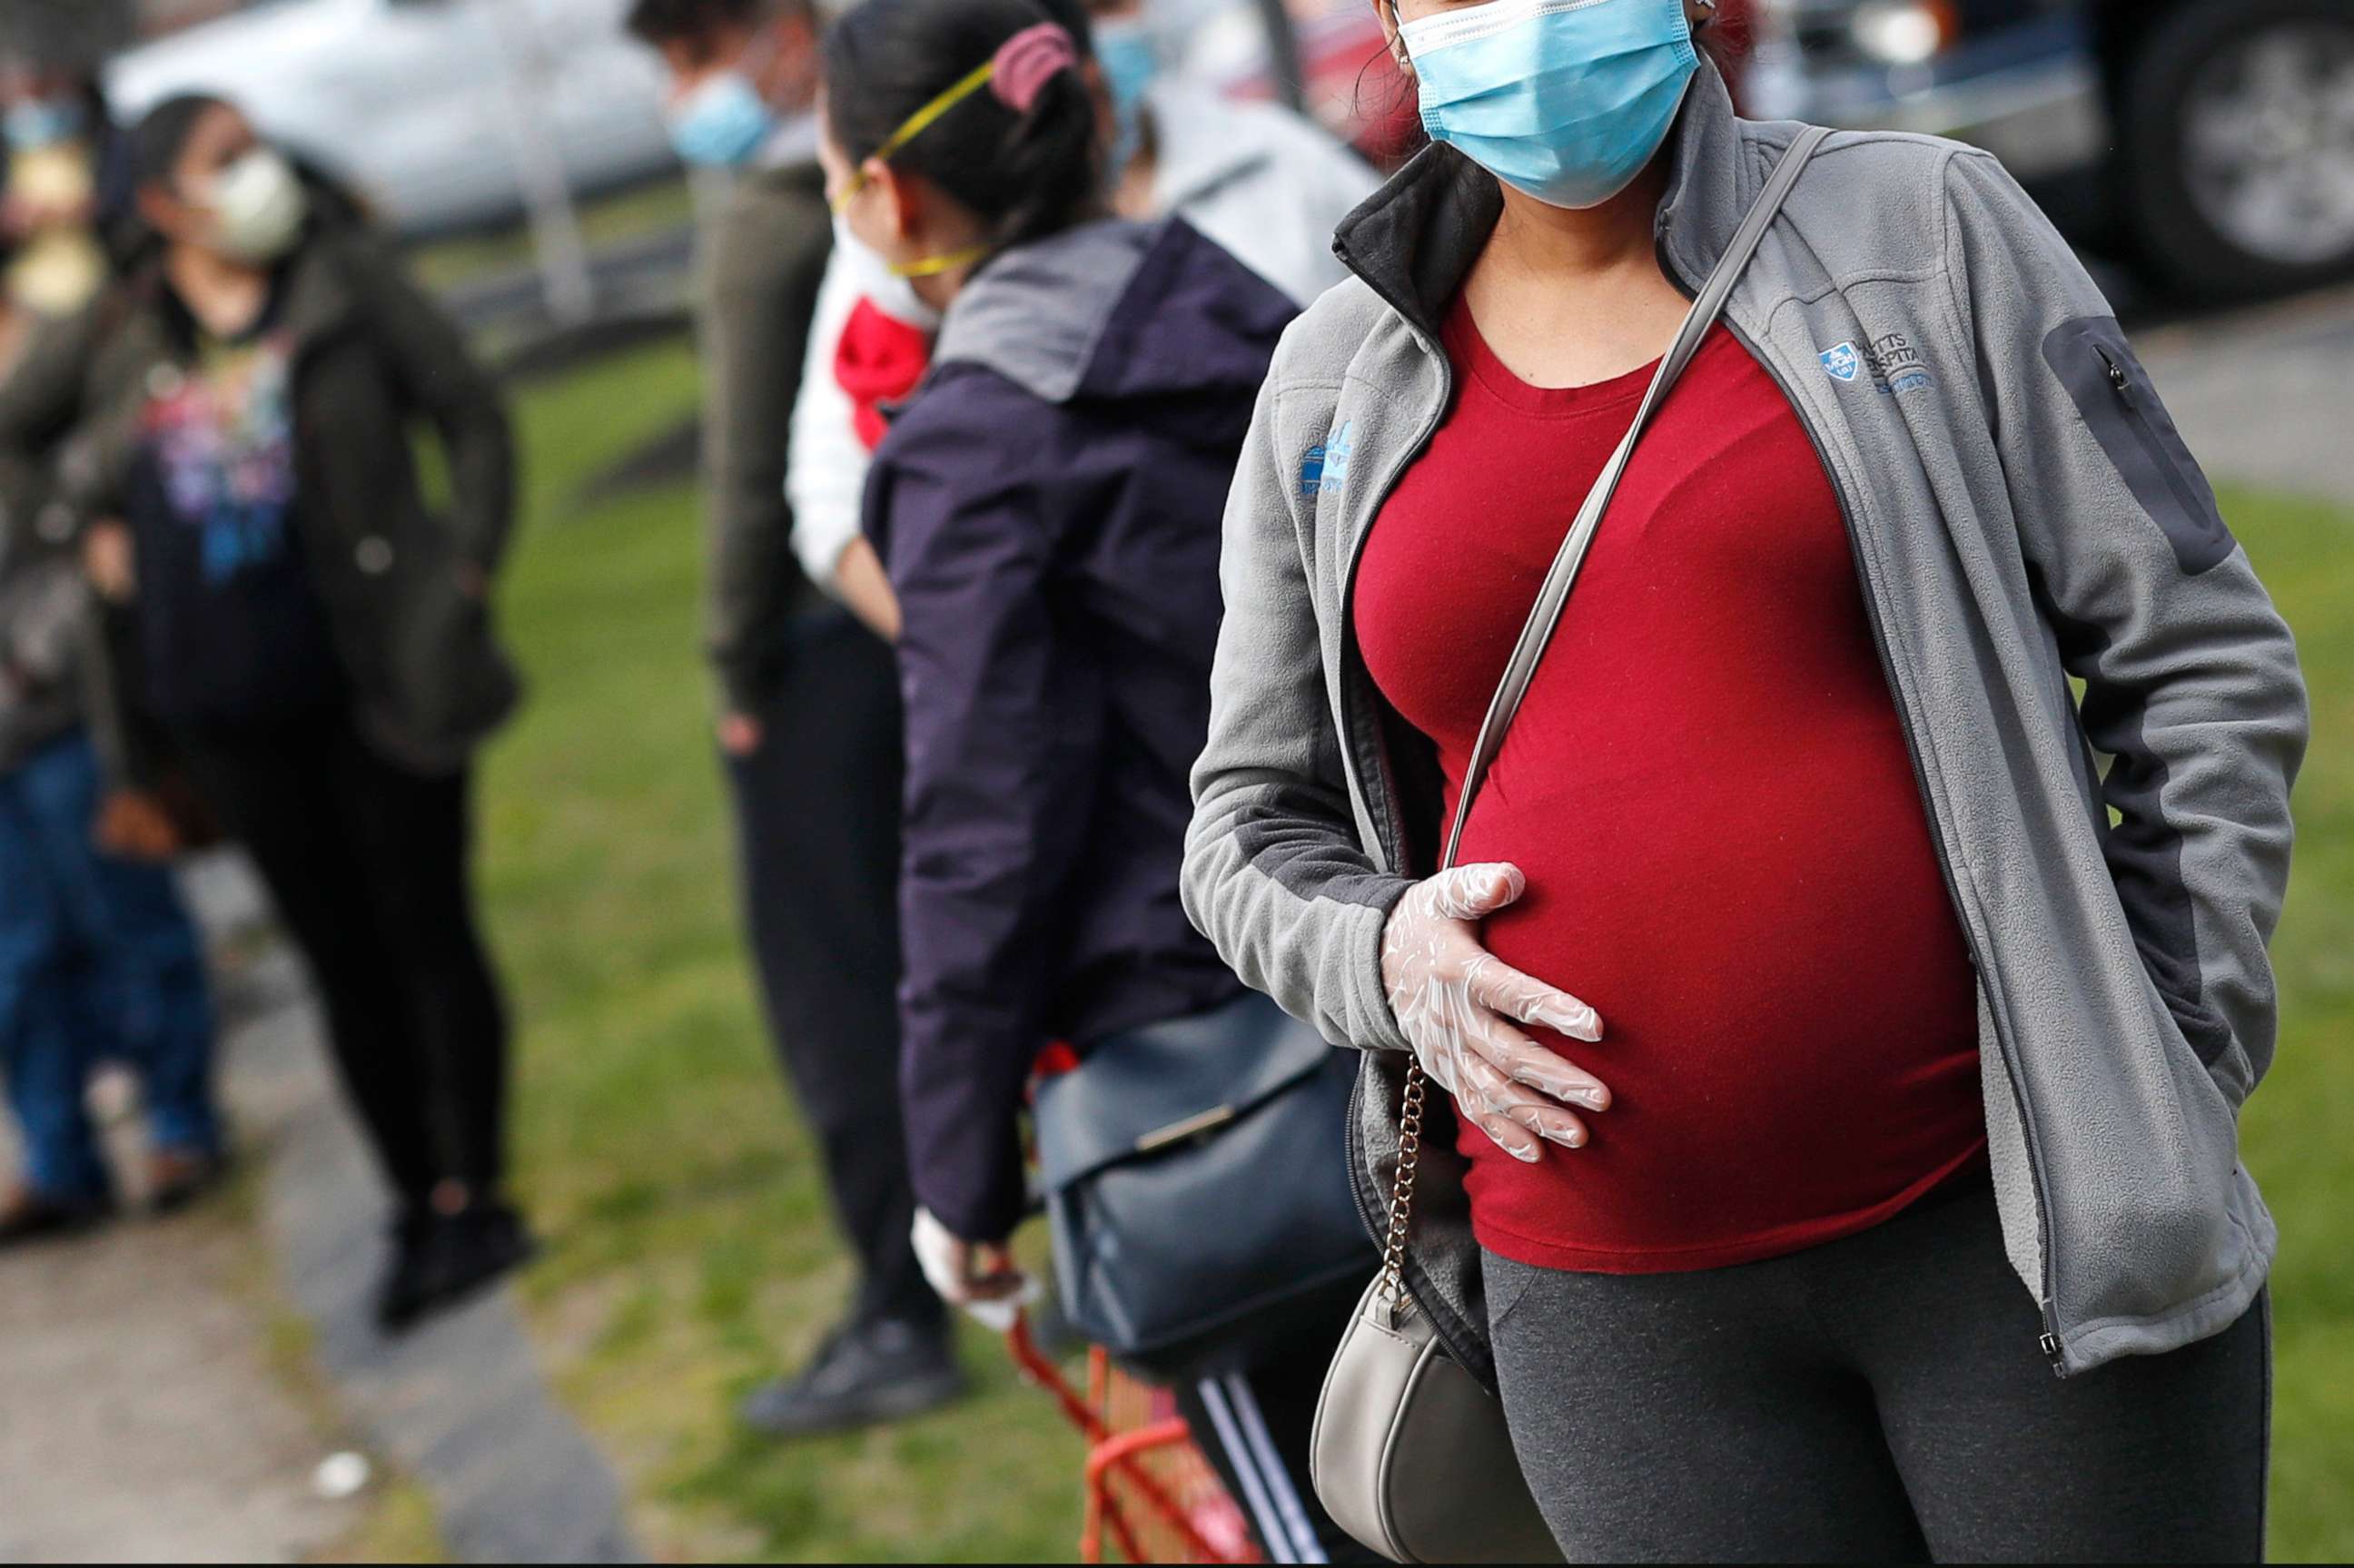 PHOTO: A pregnant woman wearing a face mask and gloves holds her belly as she waits in line for groceries at St. Mary's Church in Waltham, Mass, May 7, 2020.